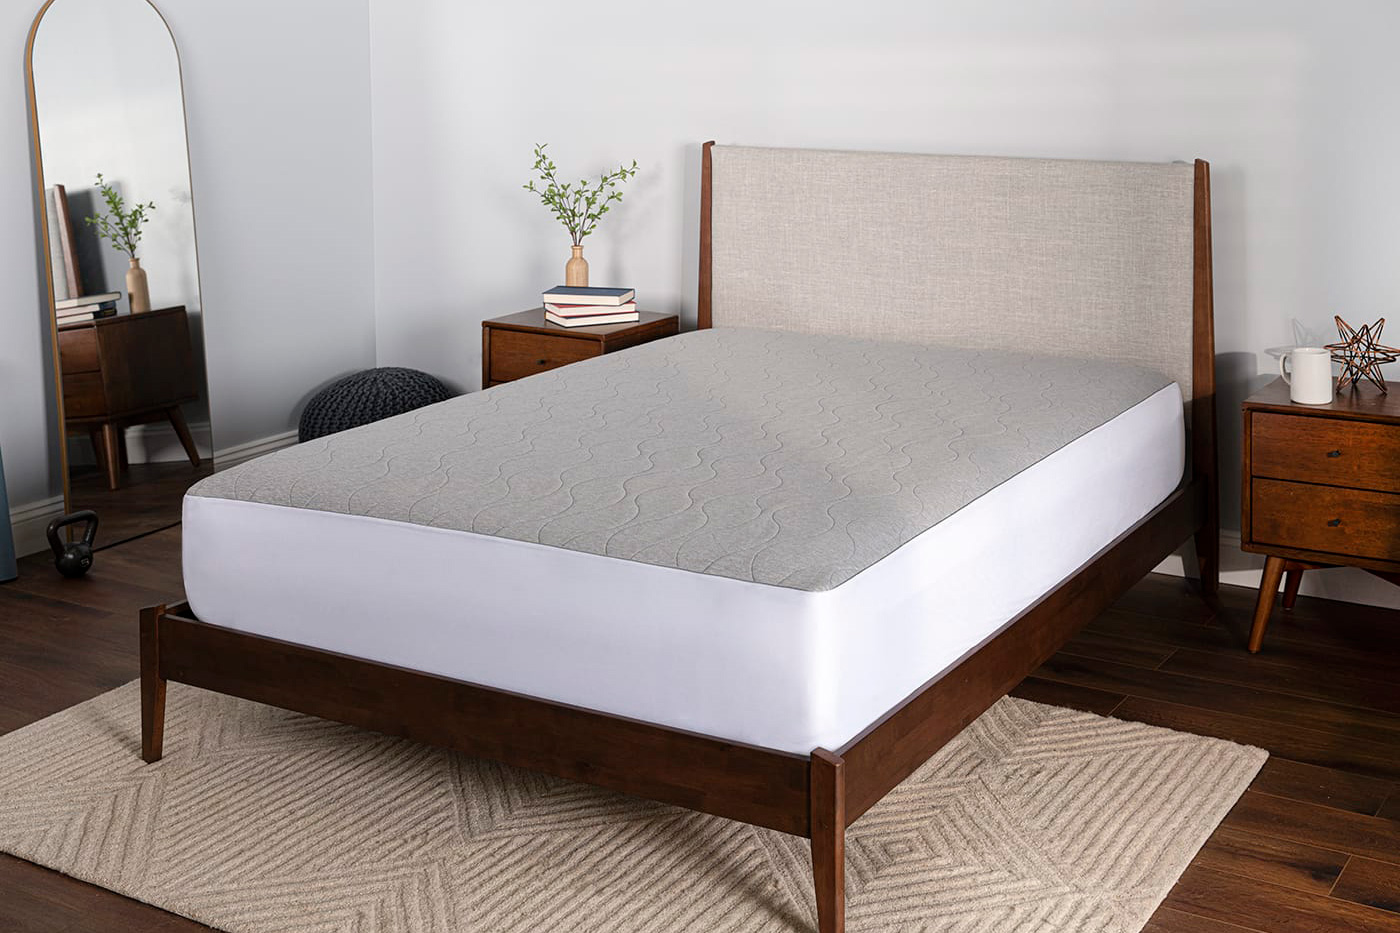 If you are looking for quality and ease of use for your bed and mattress, then choose Bedgear Air-X Mattress Protector